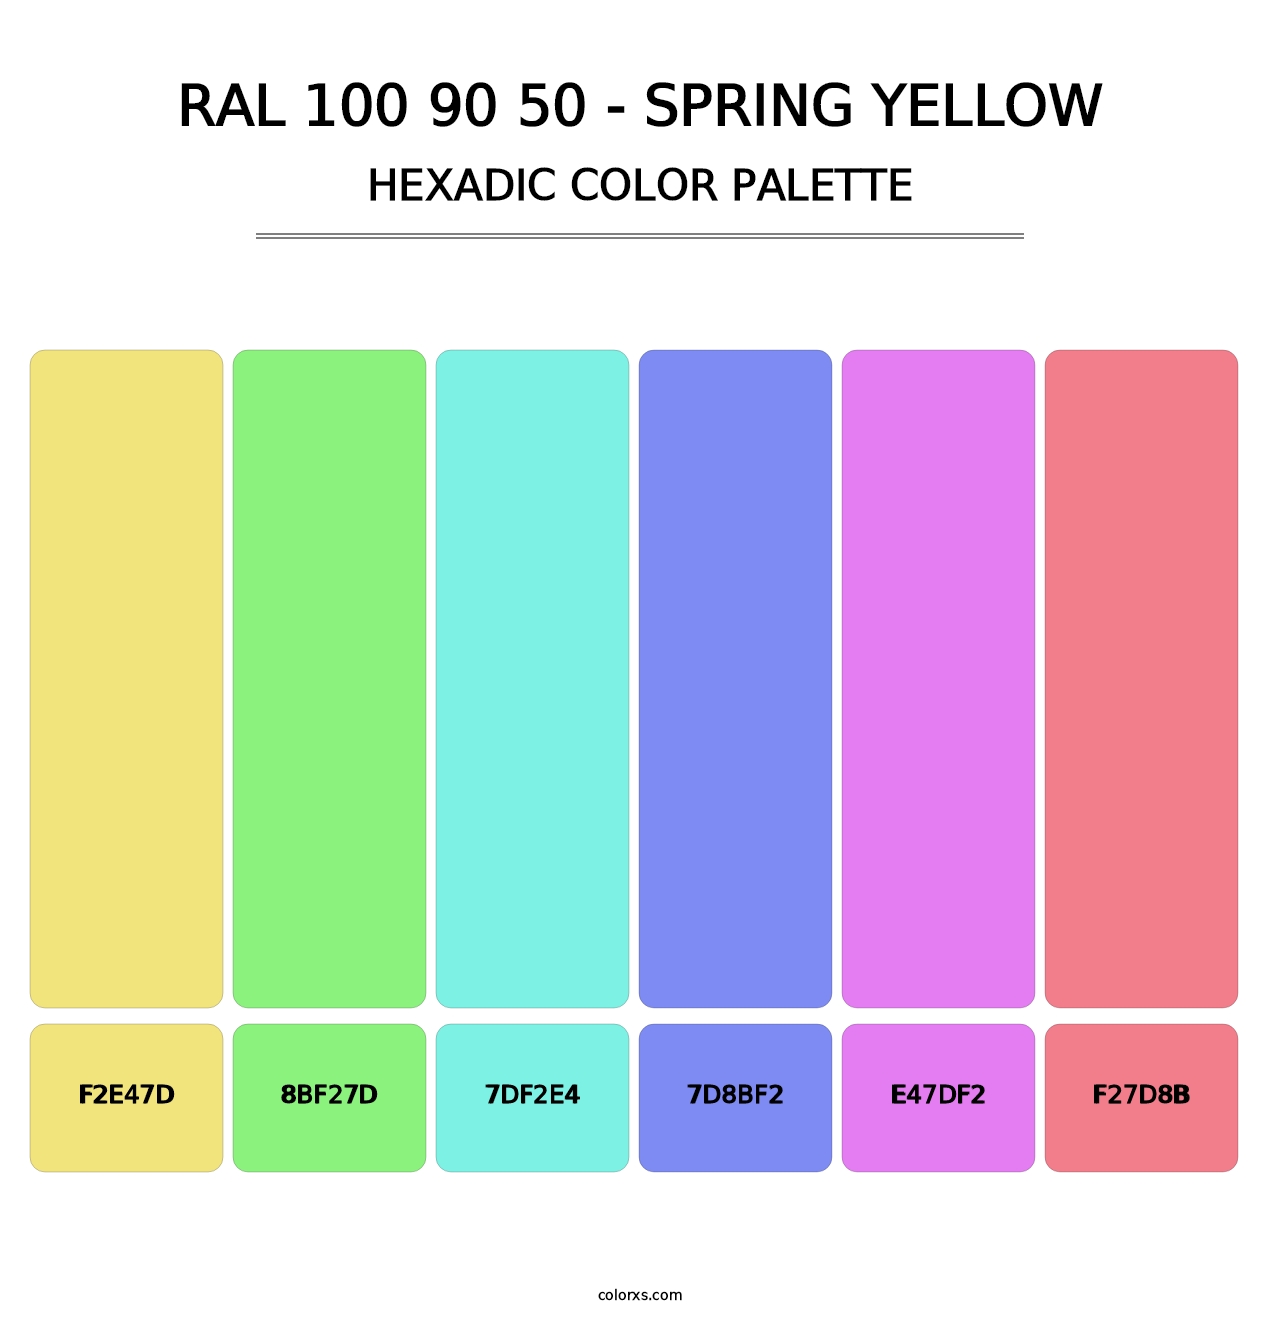 RAL 100 90 50 - Spring Yellow - Hexadic Color Palette